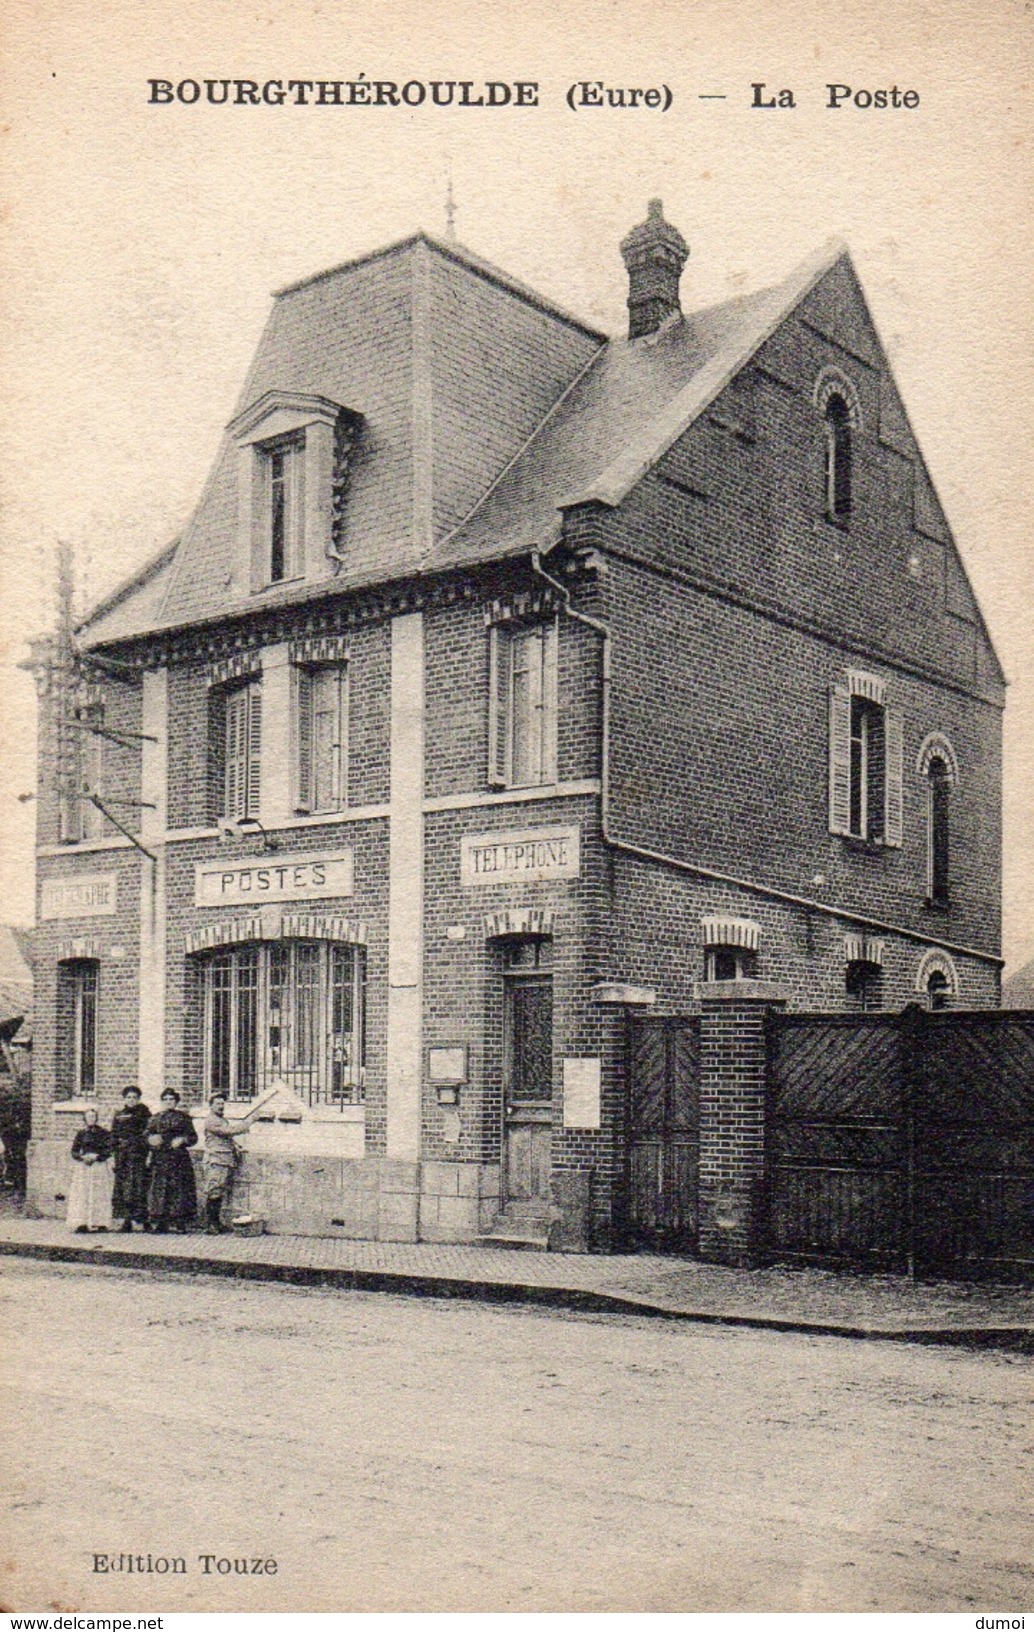 BOURTHEROULDE  -  La Poste - Bourgtheroulde